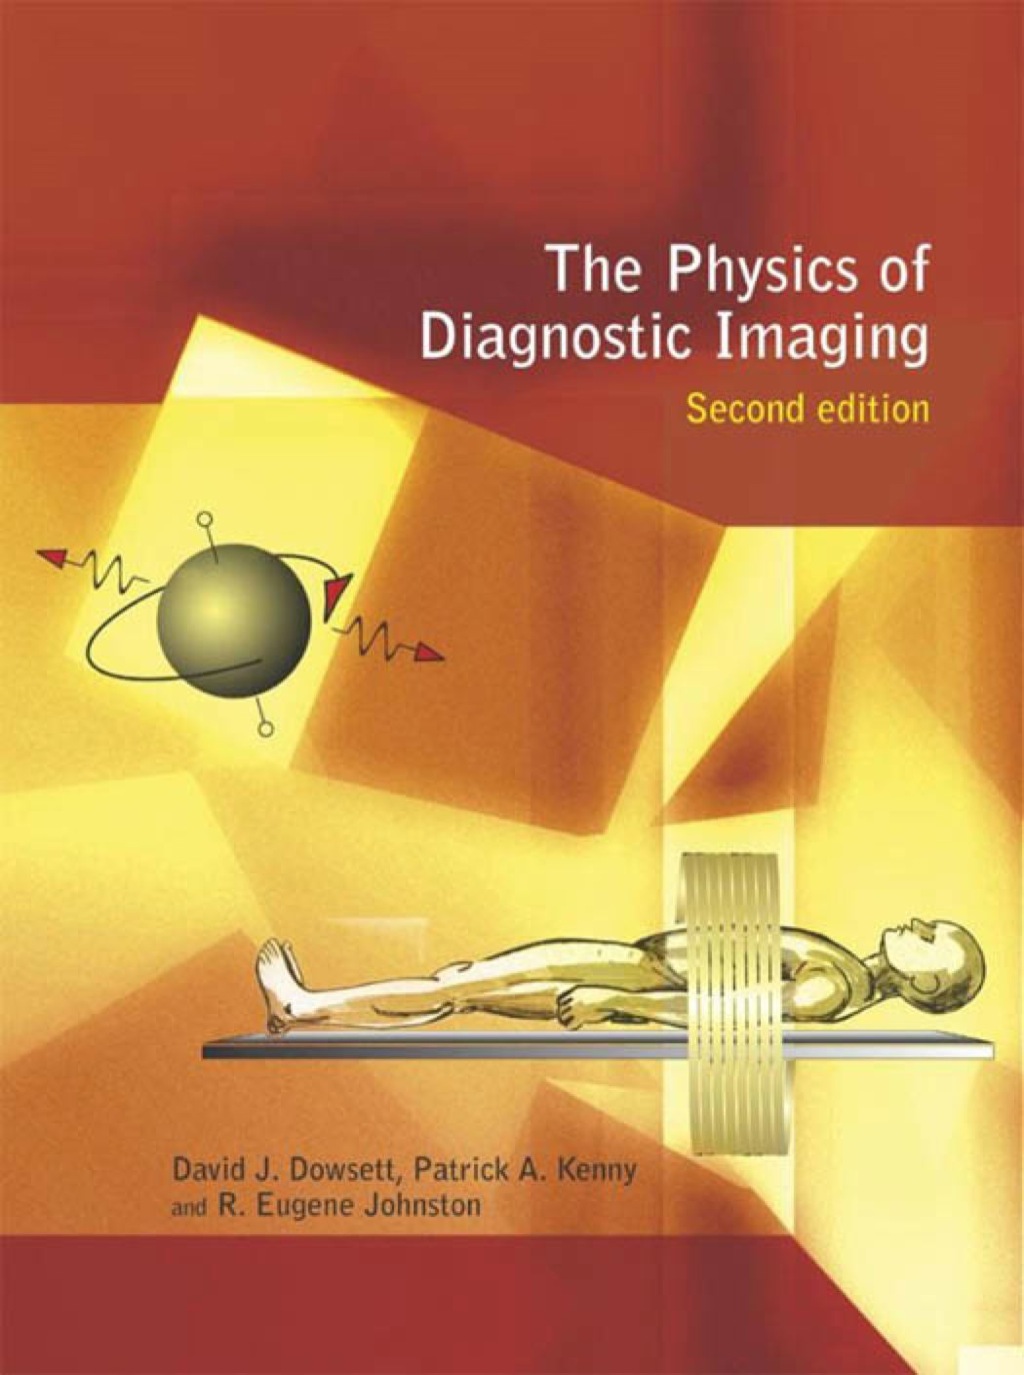 The Physics of Diagnostic Imaging - 2nd Edition (eBook)